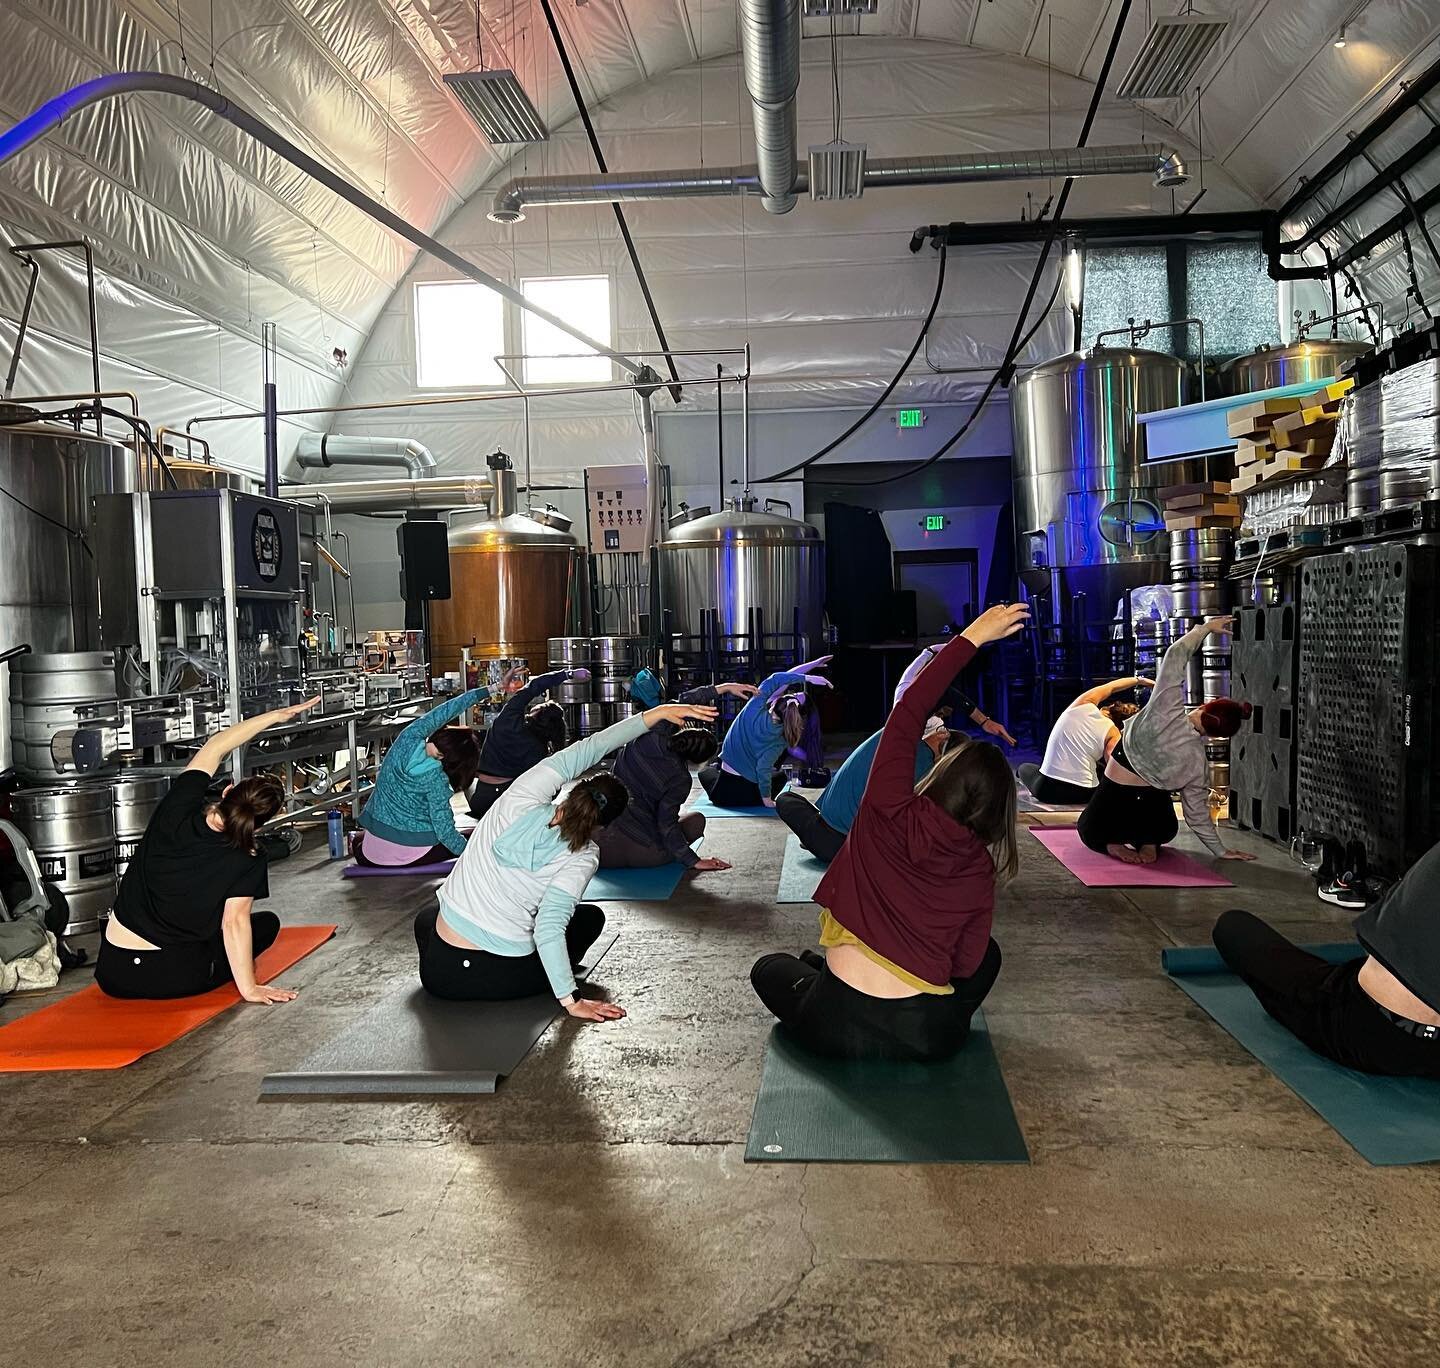 Beer Yoga is this Saturday at 1pm! Send us a message to reserve your spot!
$20 gets you your first beer and entry into yoga taught by Becky Baumgartner. This is a yoga class for all abilities.